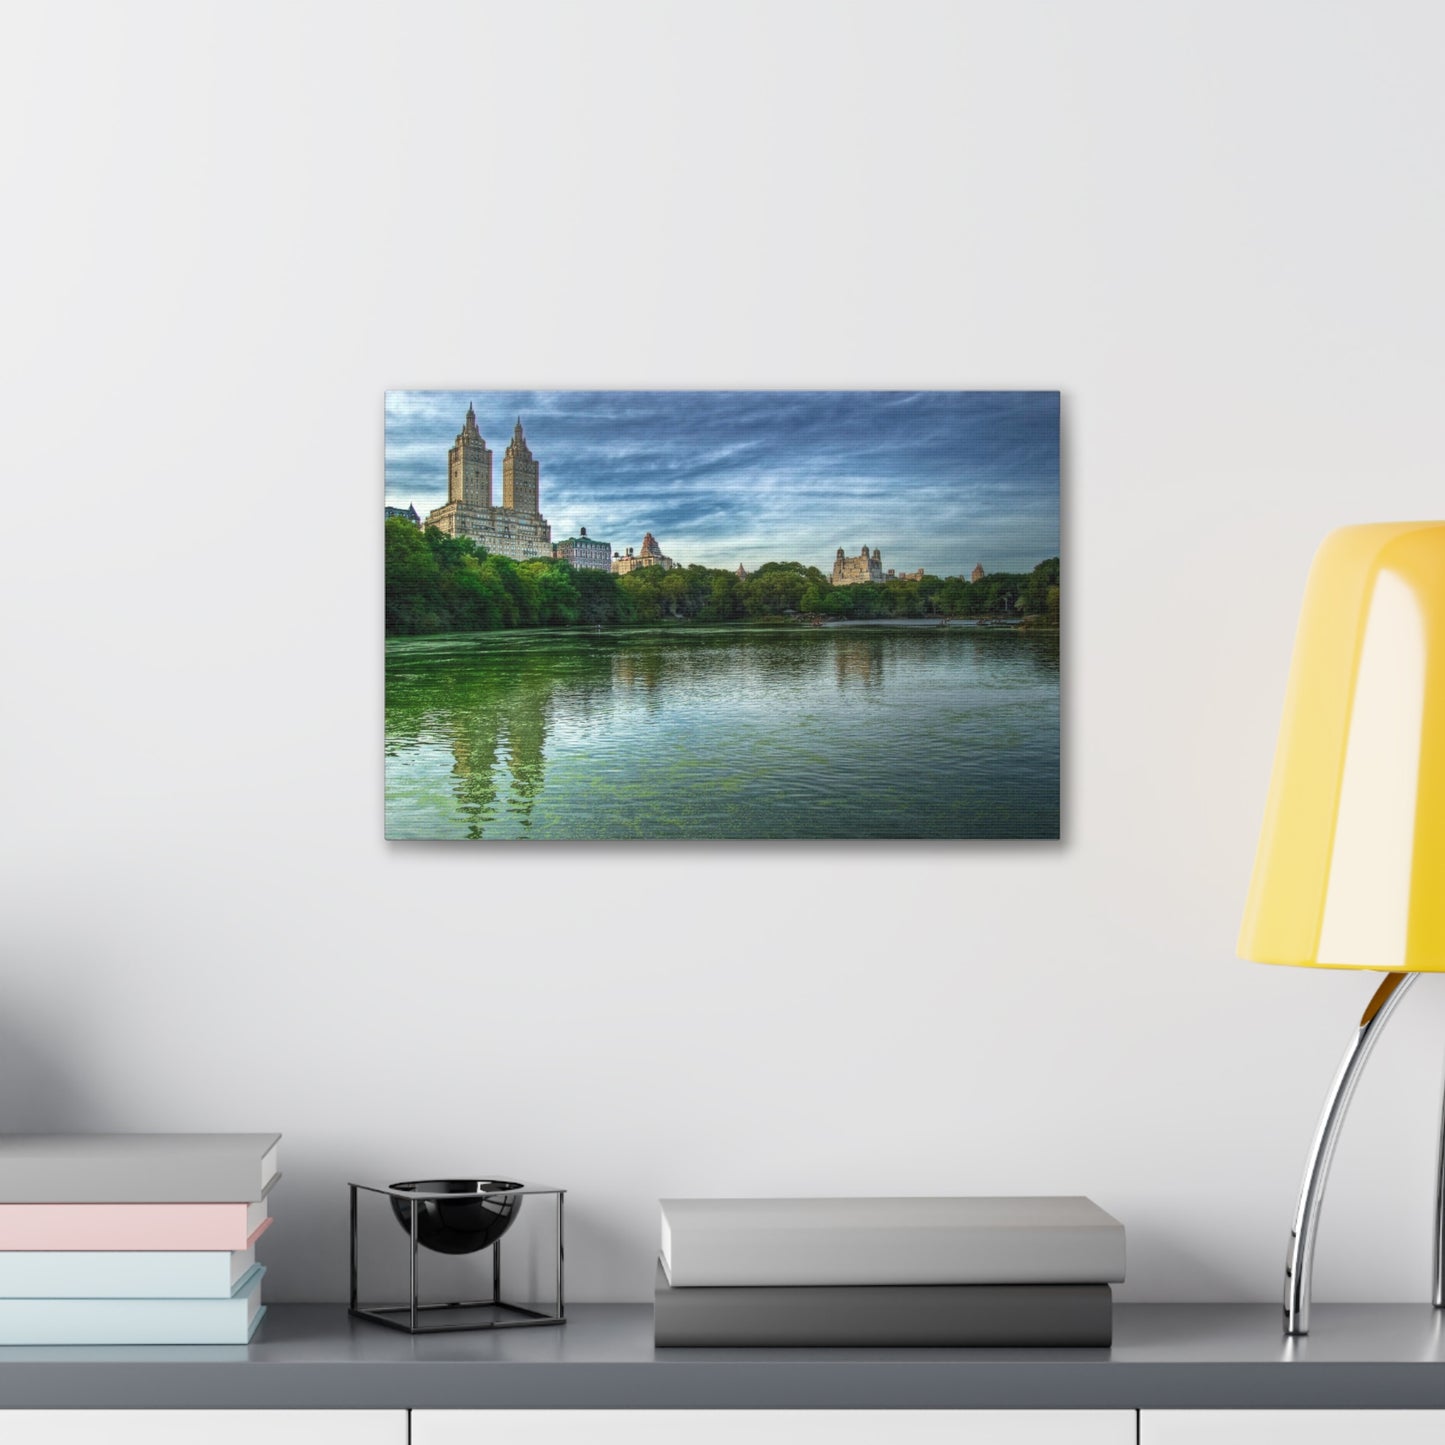 Canvas Print Of The Lake At Central Park in New York City For Wall Art